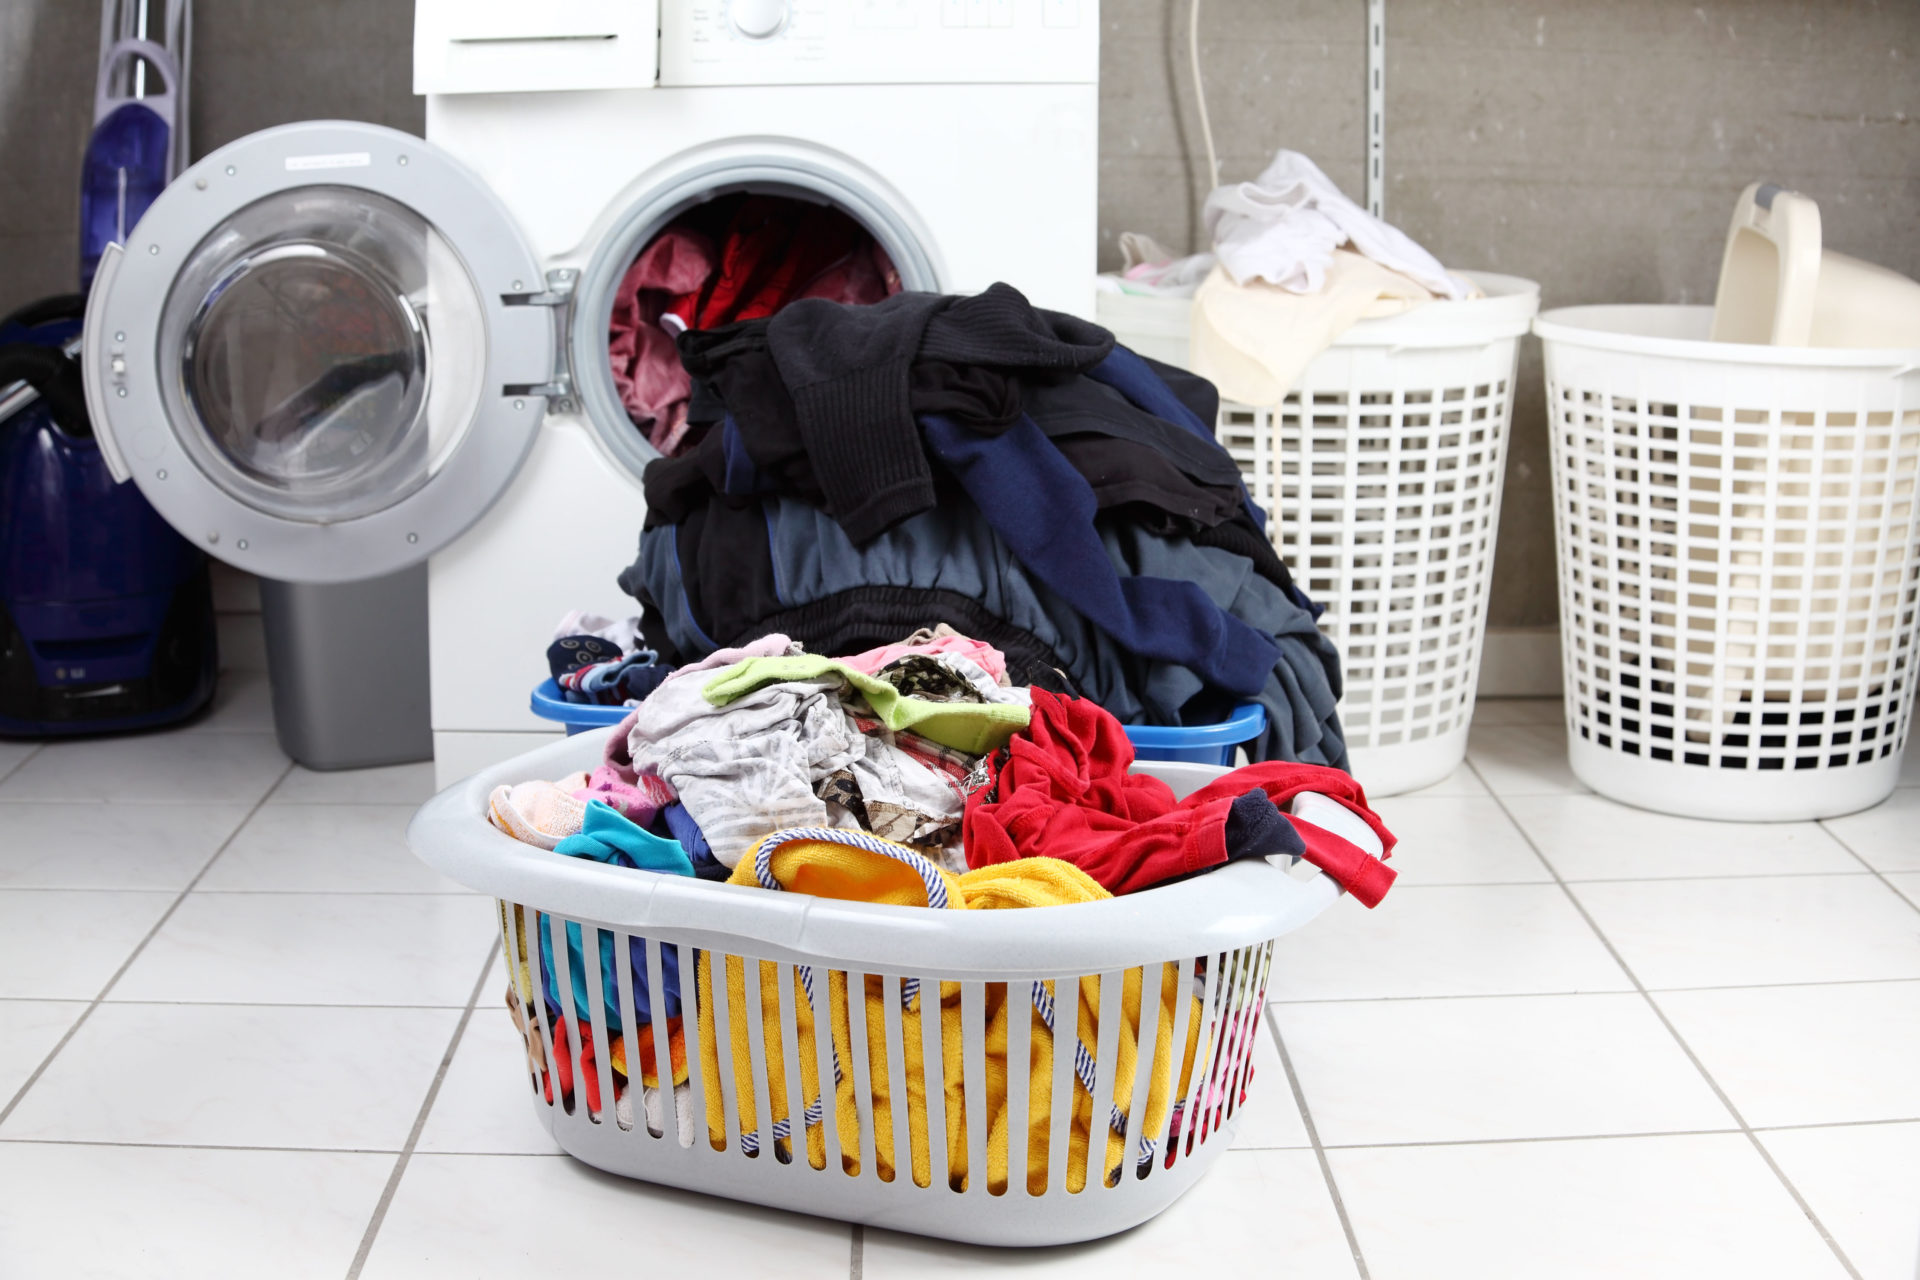 Two baskets of dirty laundry in the washing room, including shirts, trousers and underwear.